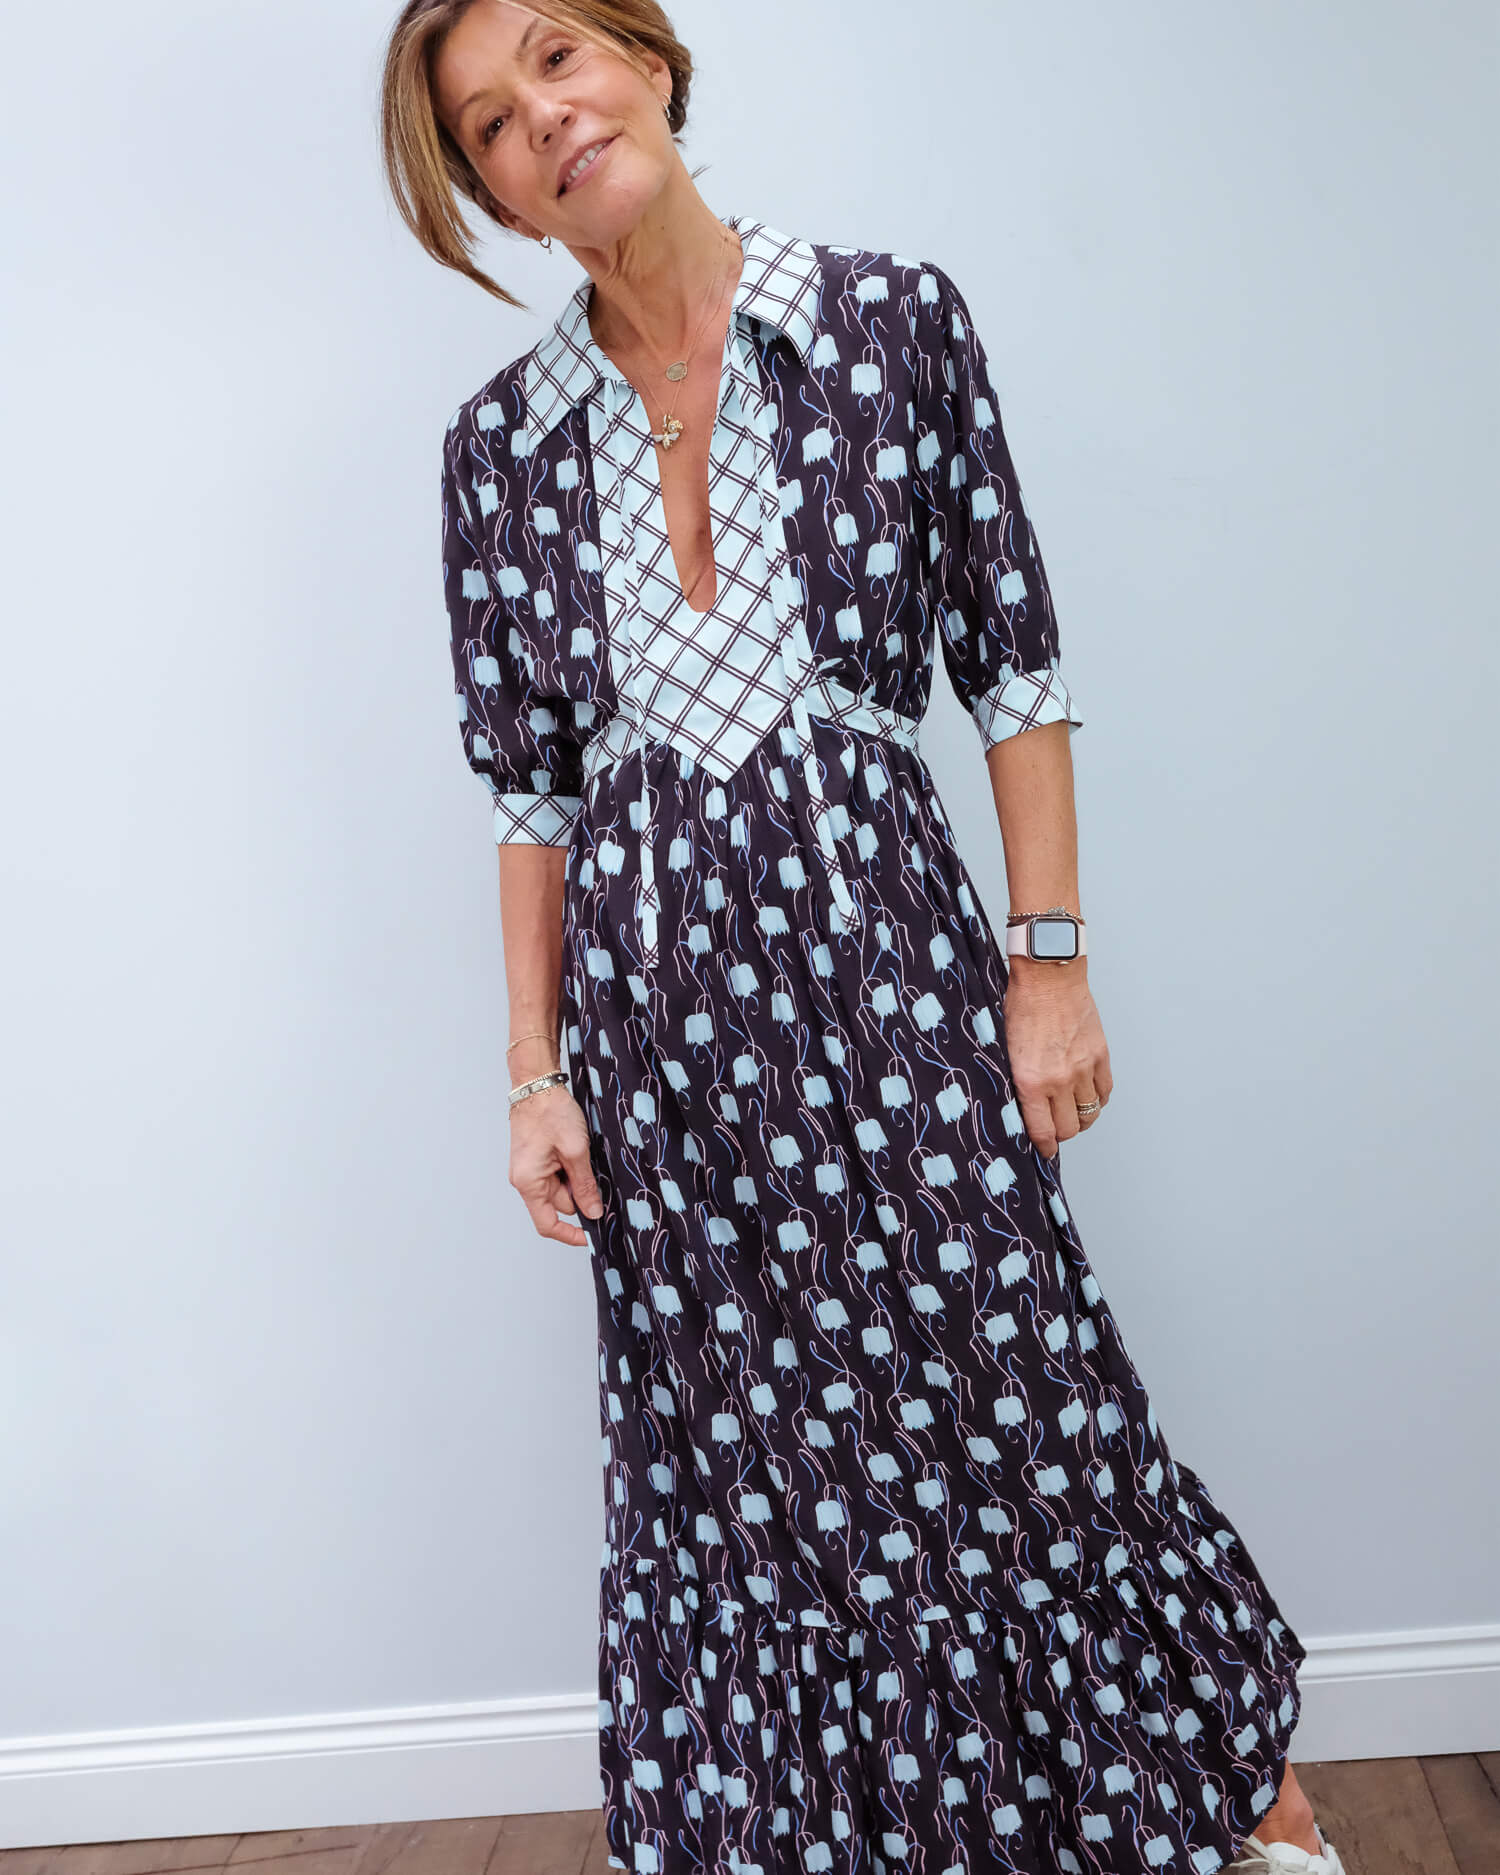 PPXOC Loopy Lou dress in picnic, tulip tower